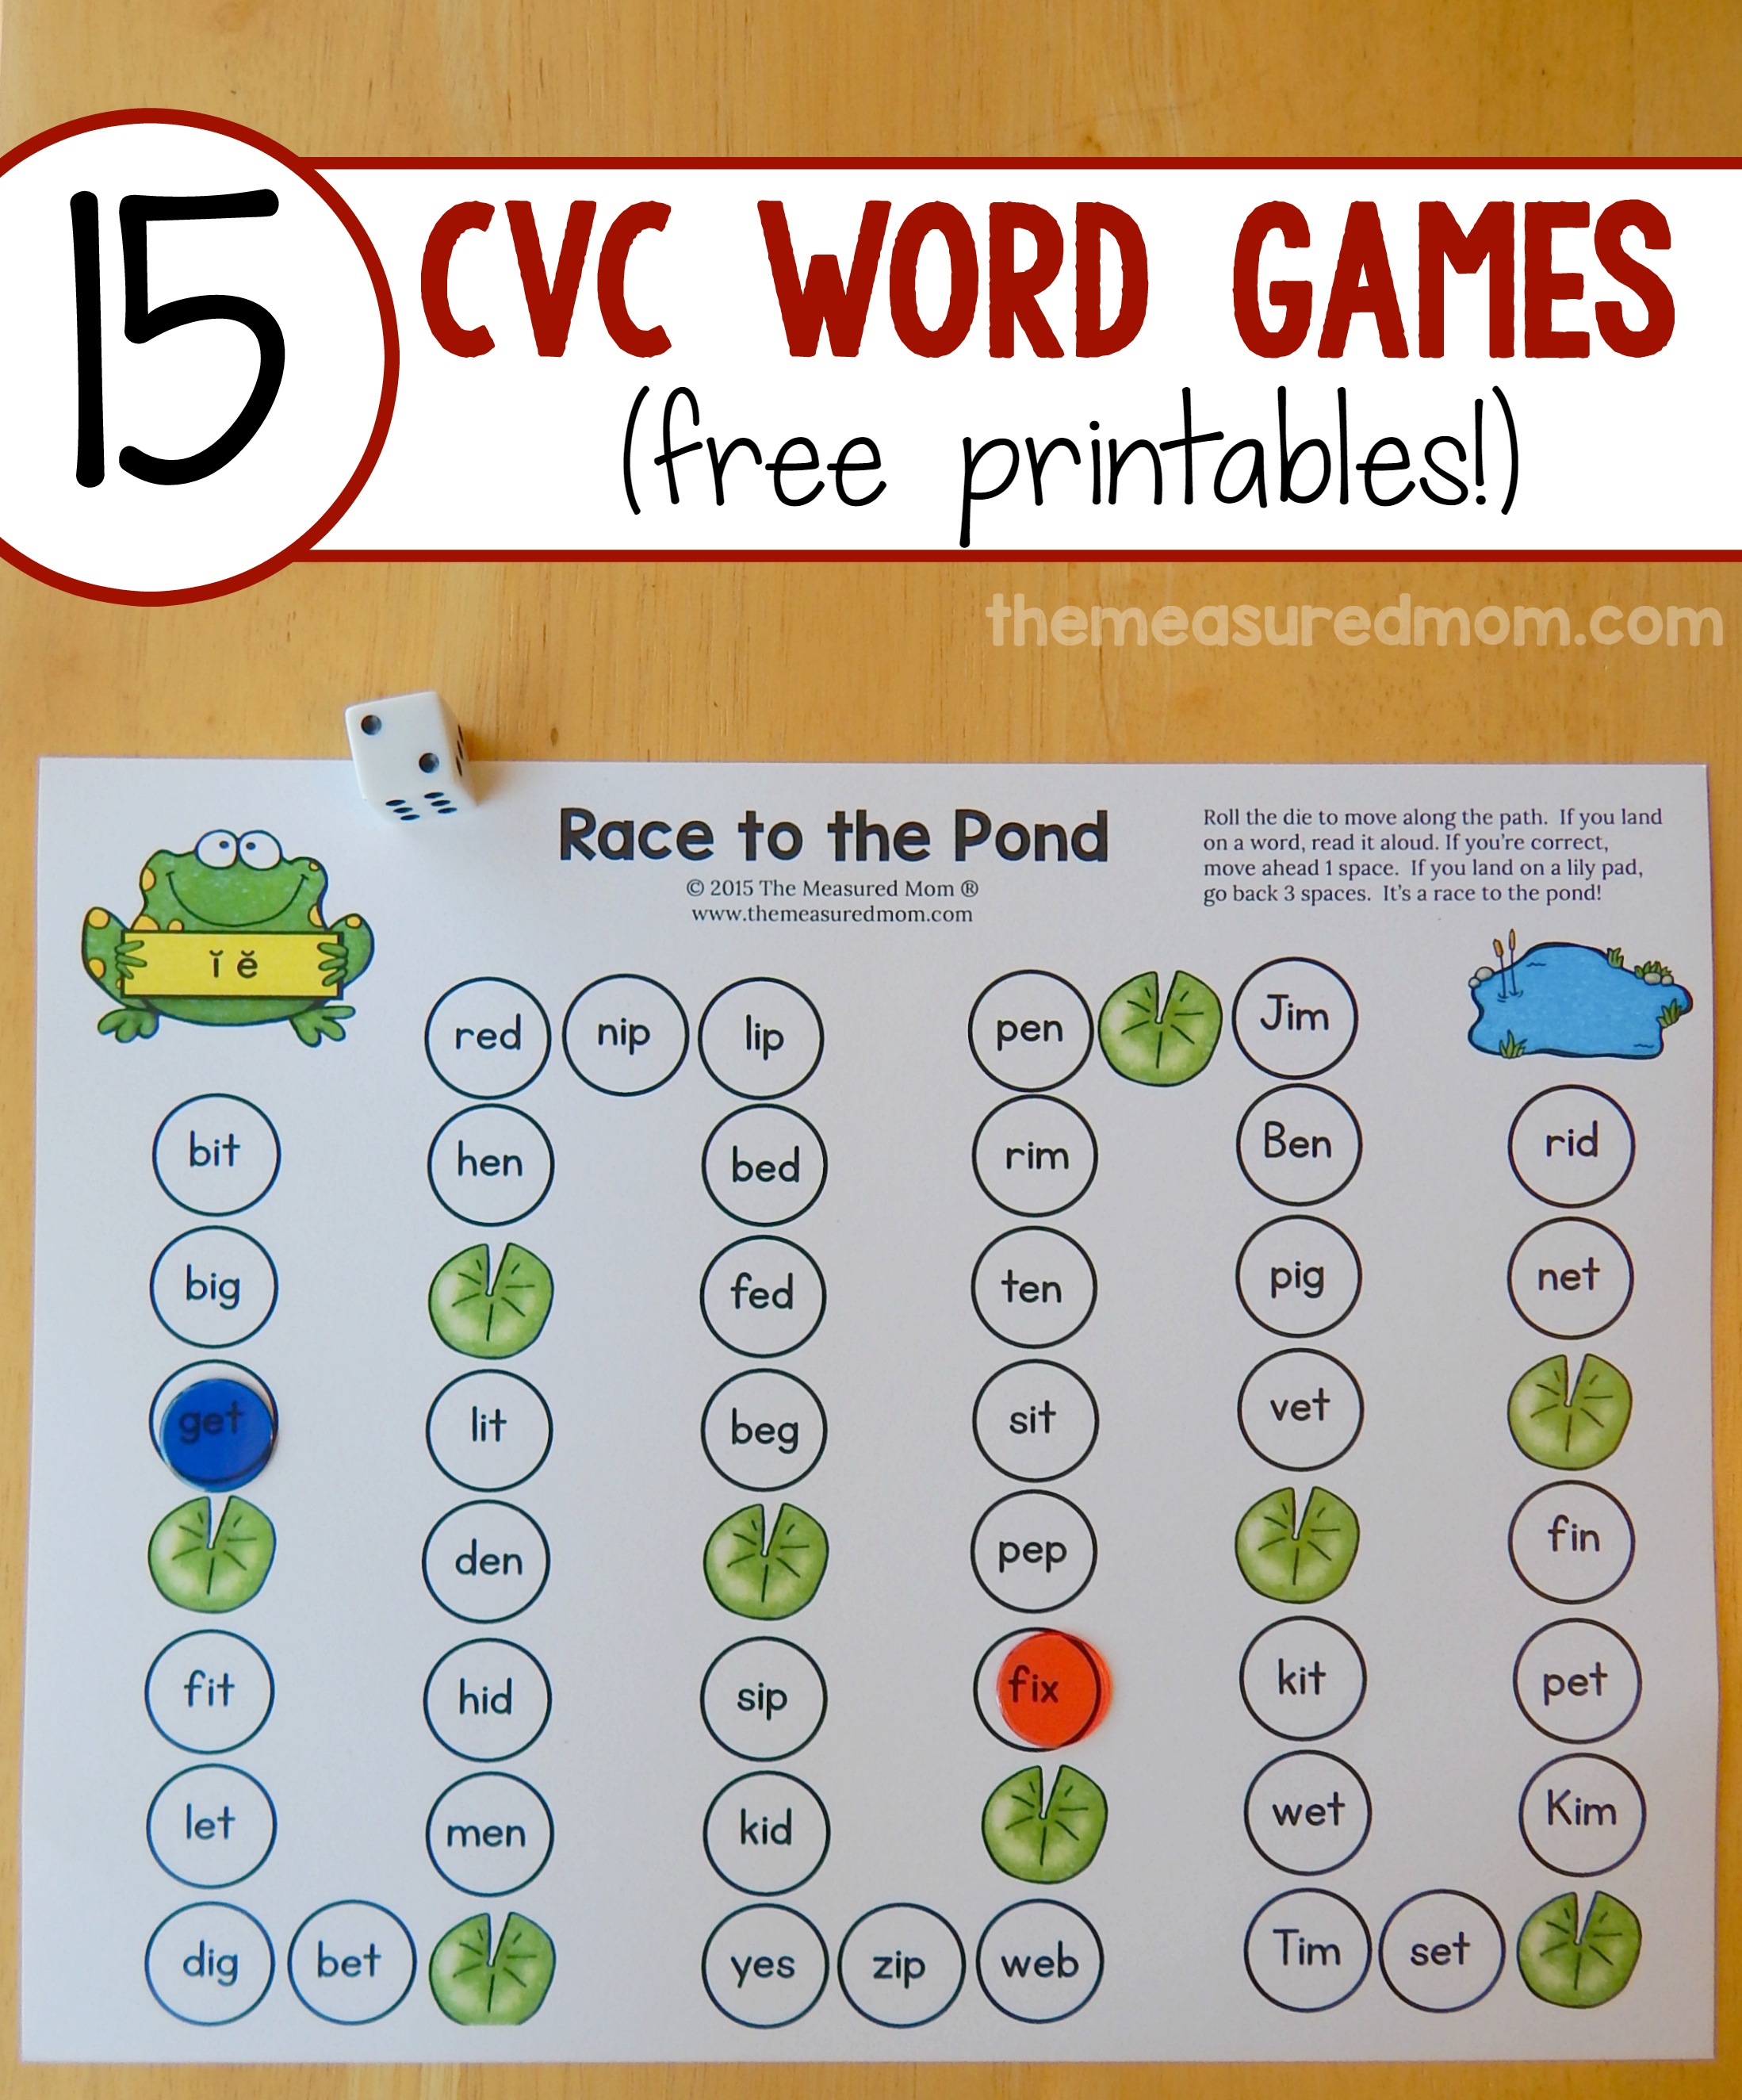 Teach Cvc Words With 15 Free Games! - The Measured Mom - Free Printable Word Games